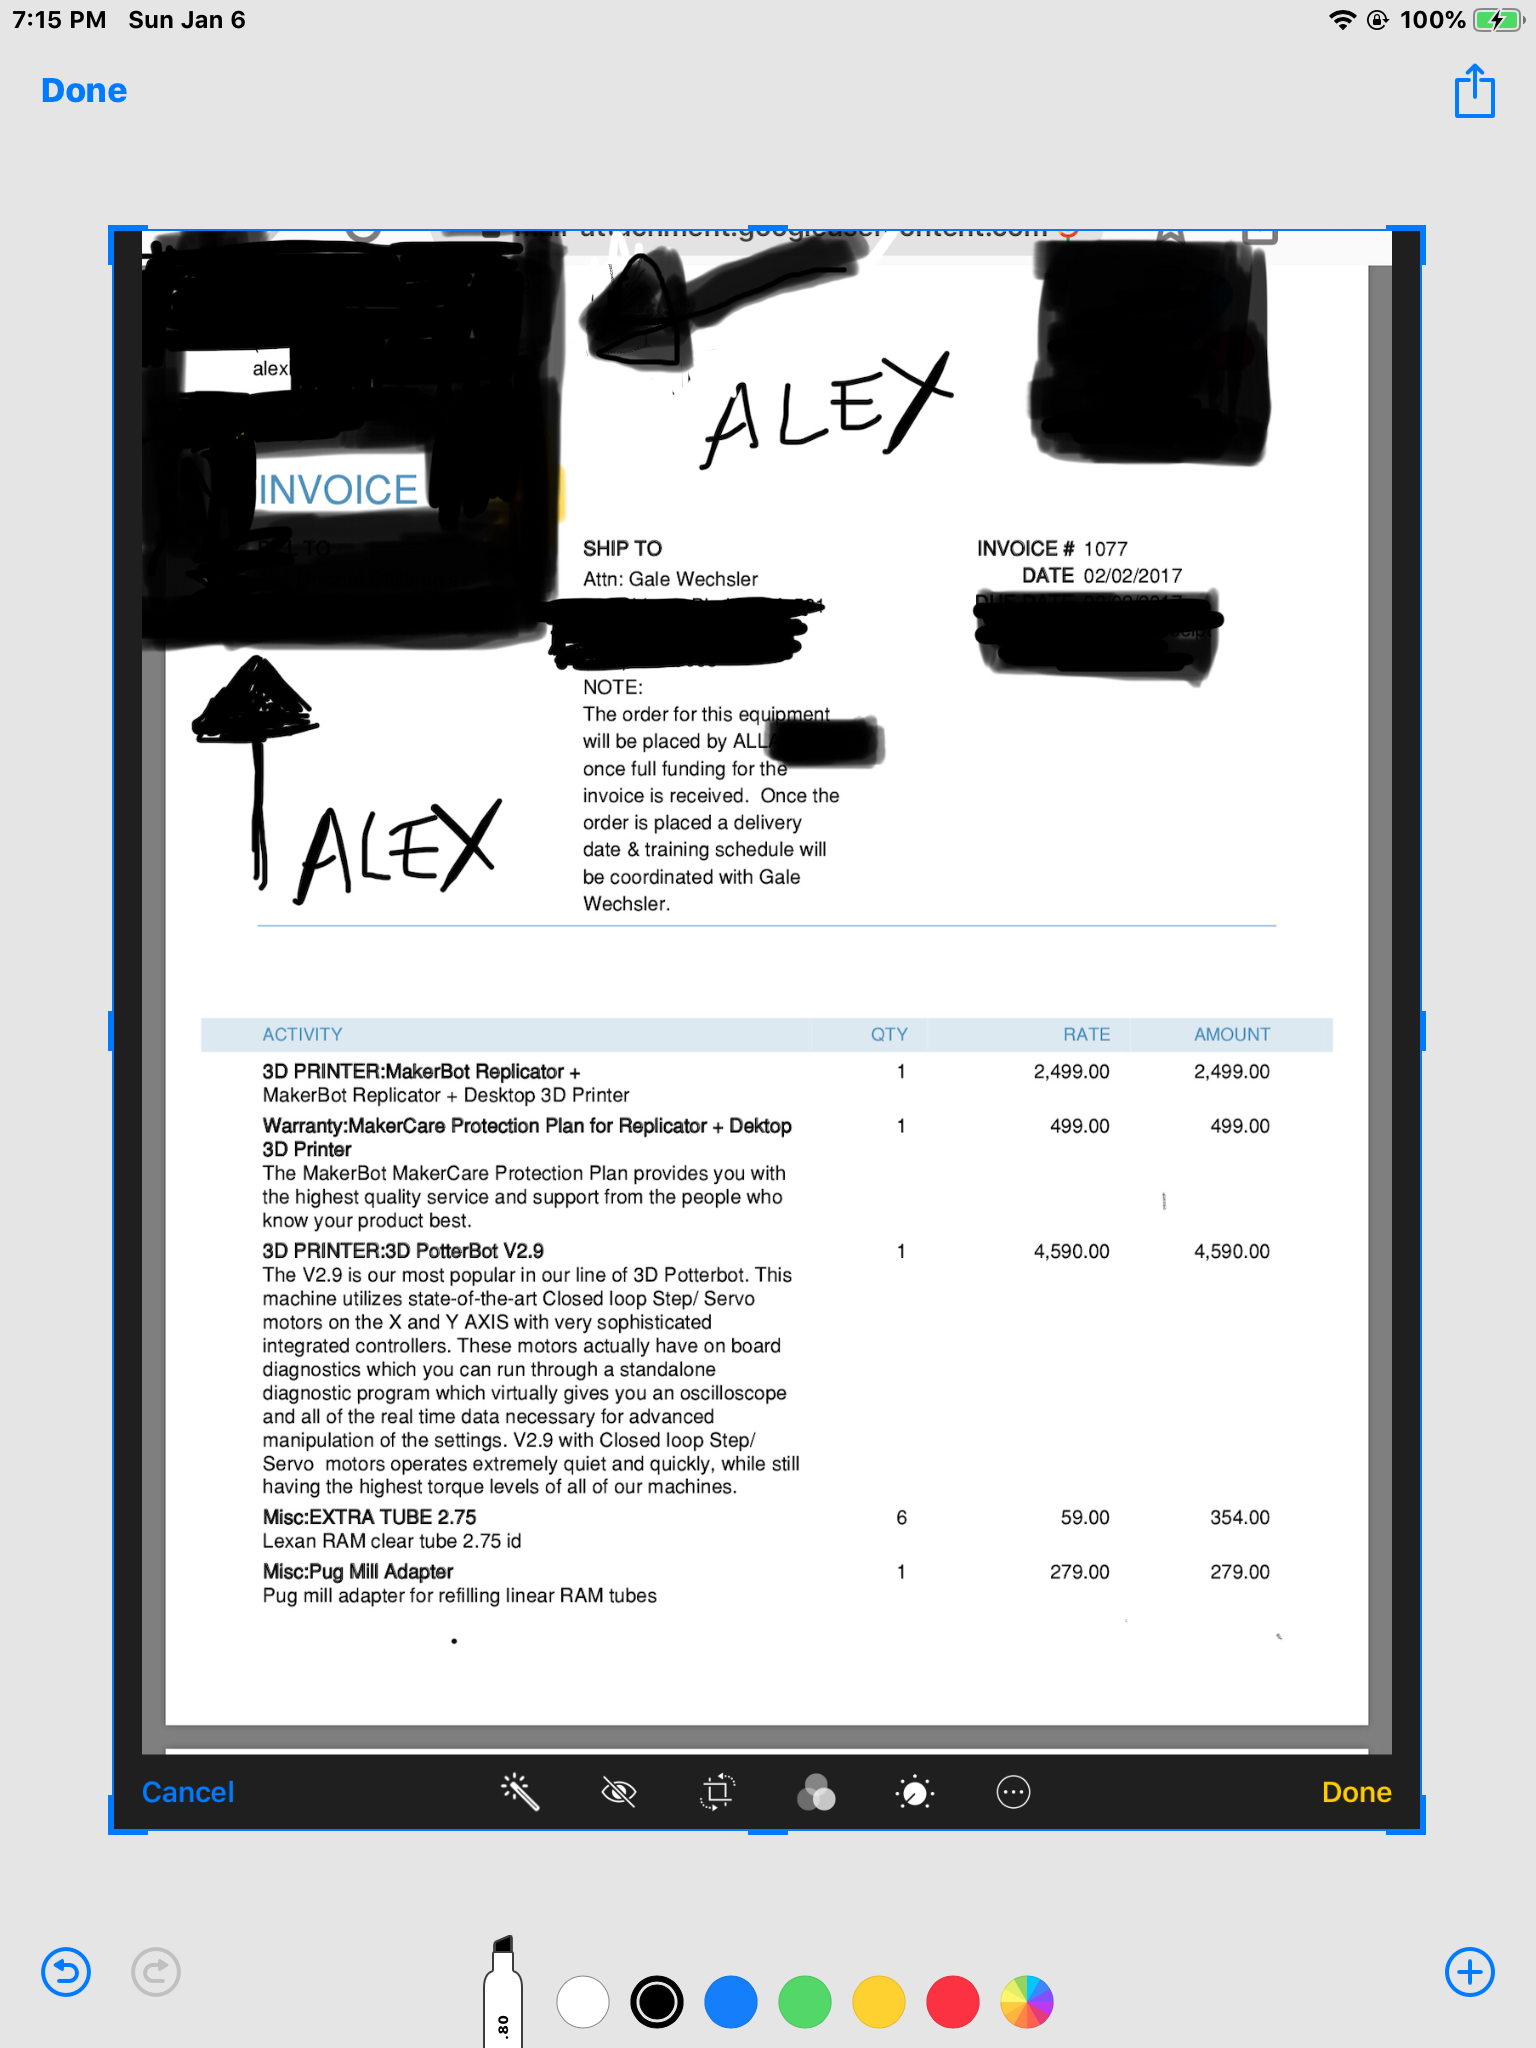 INVOICE FROM ALEX PROVING THAT I PAID FOR TRAINING